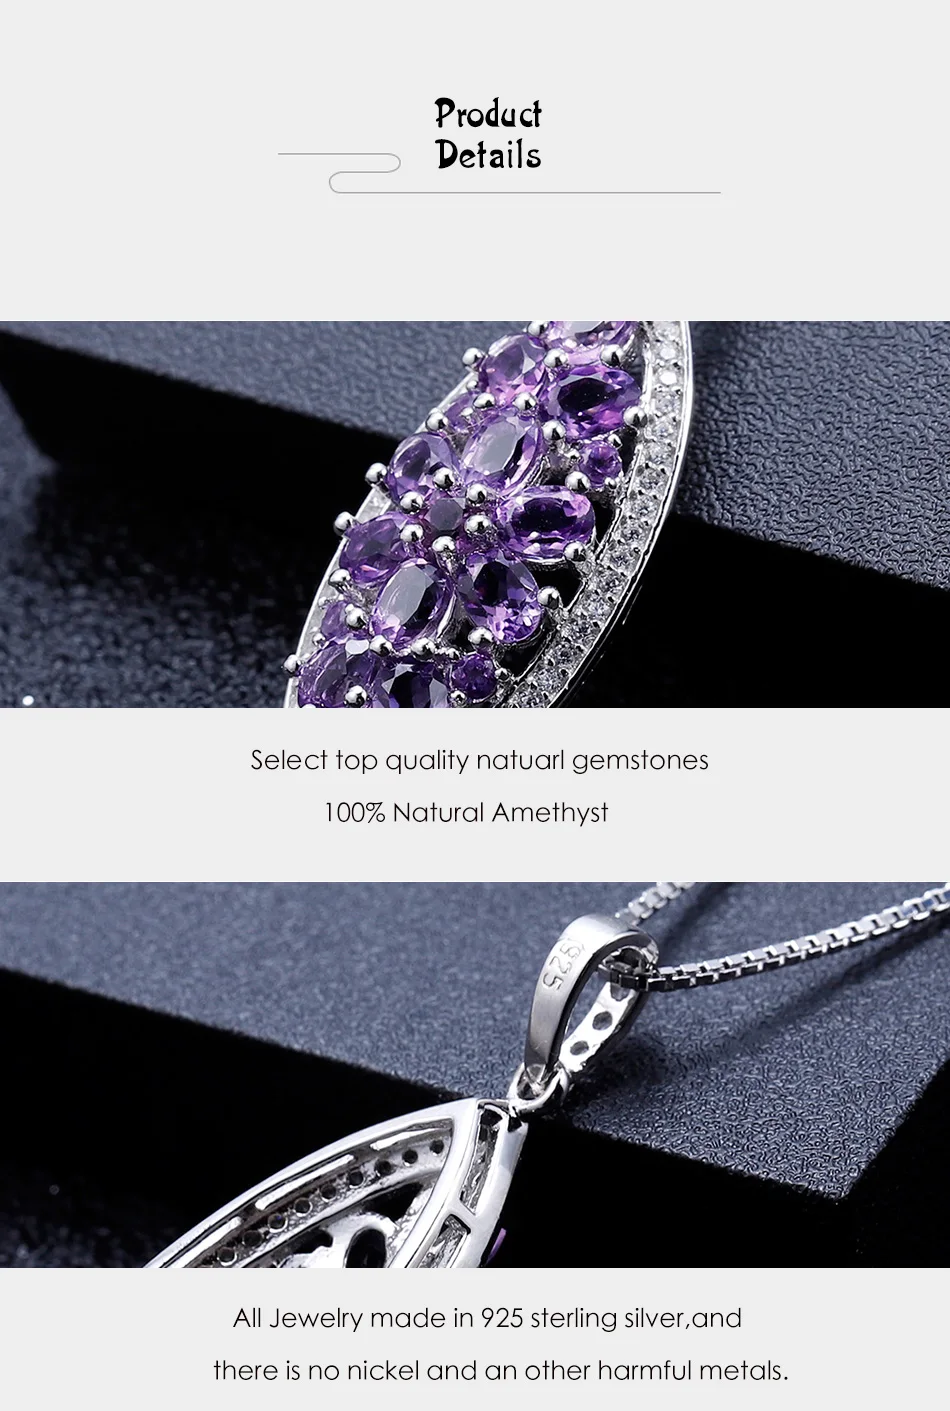 Oval Amethyst Healing Necklace